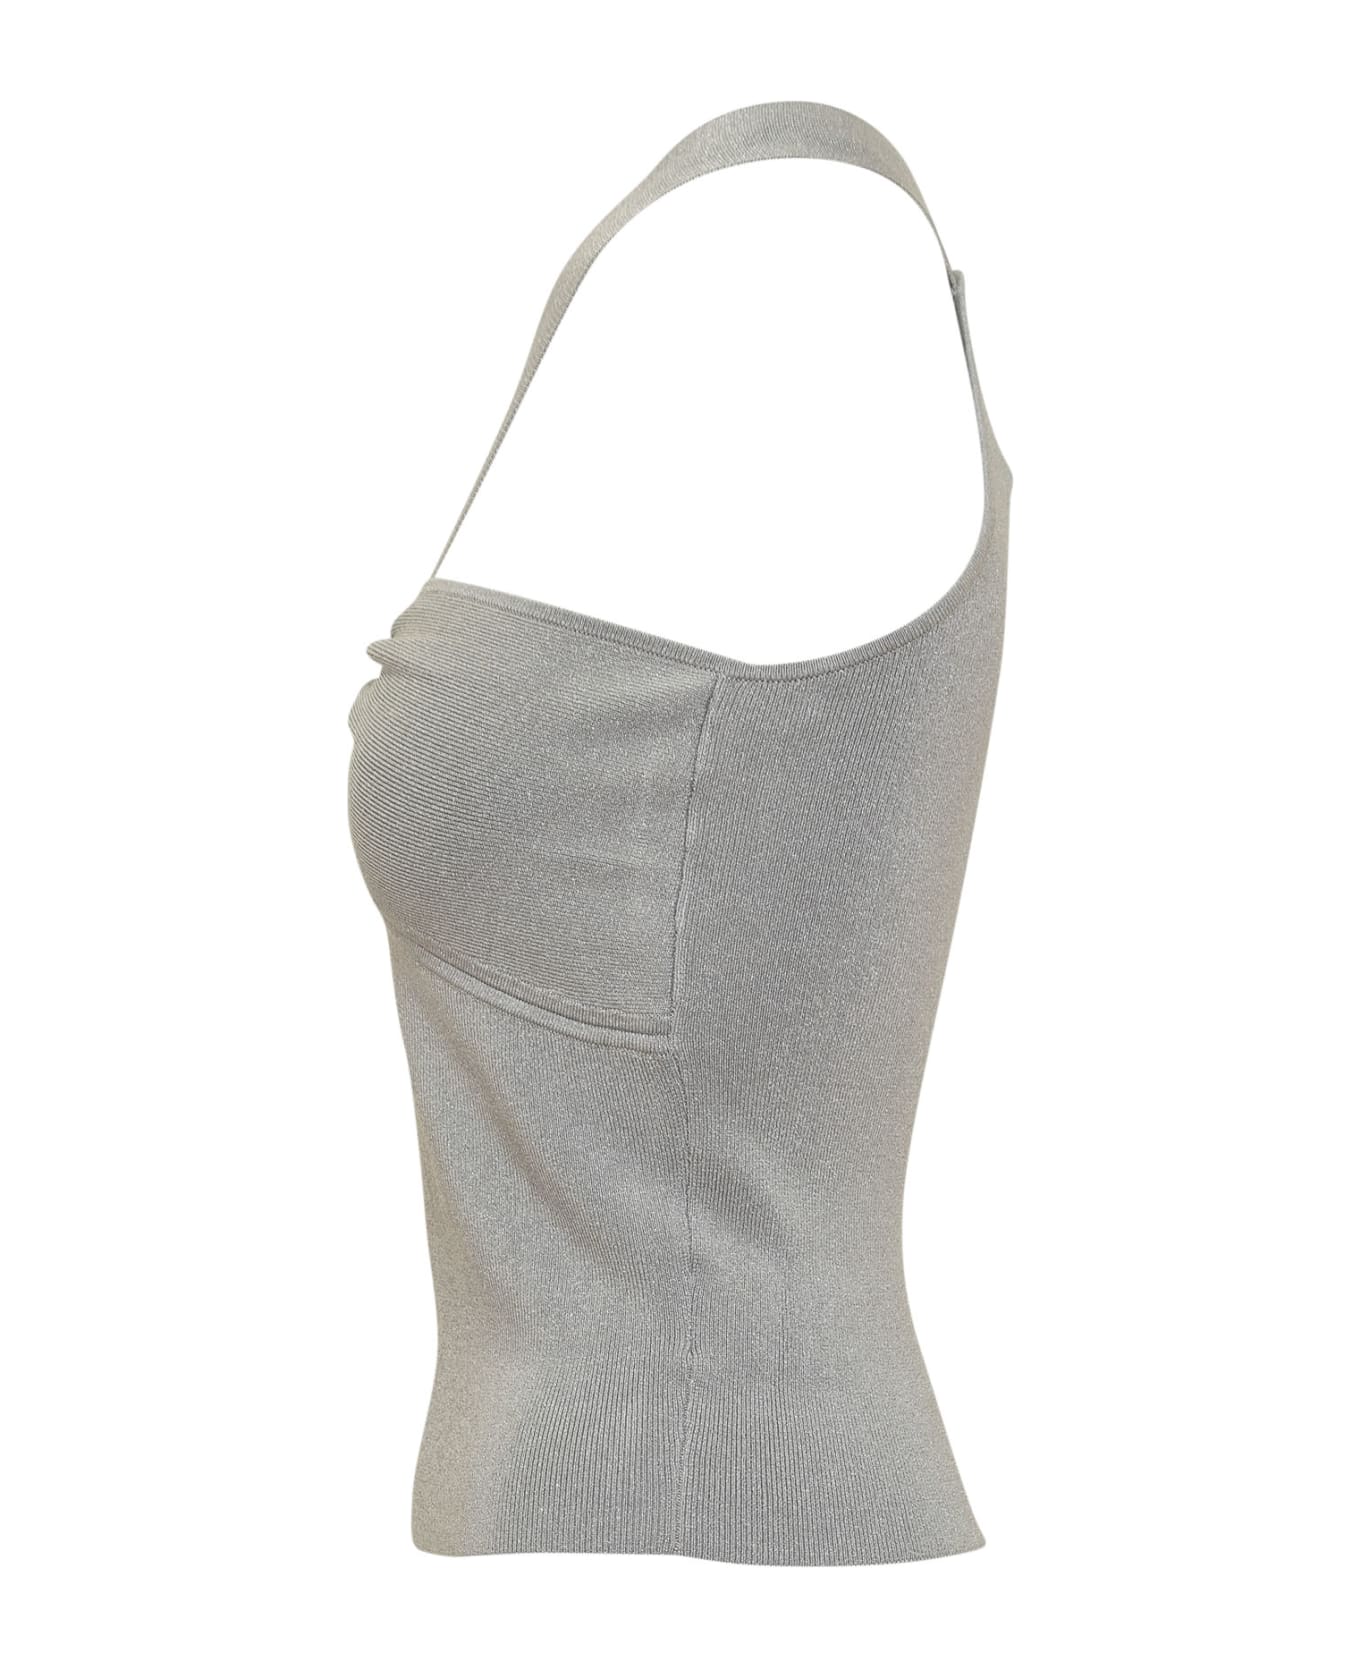 MICHAEL Michael Kors Top With Drop Opening - SILVER